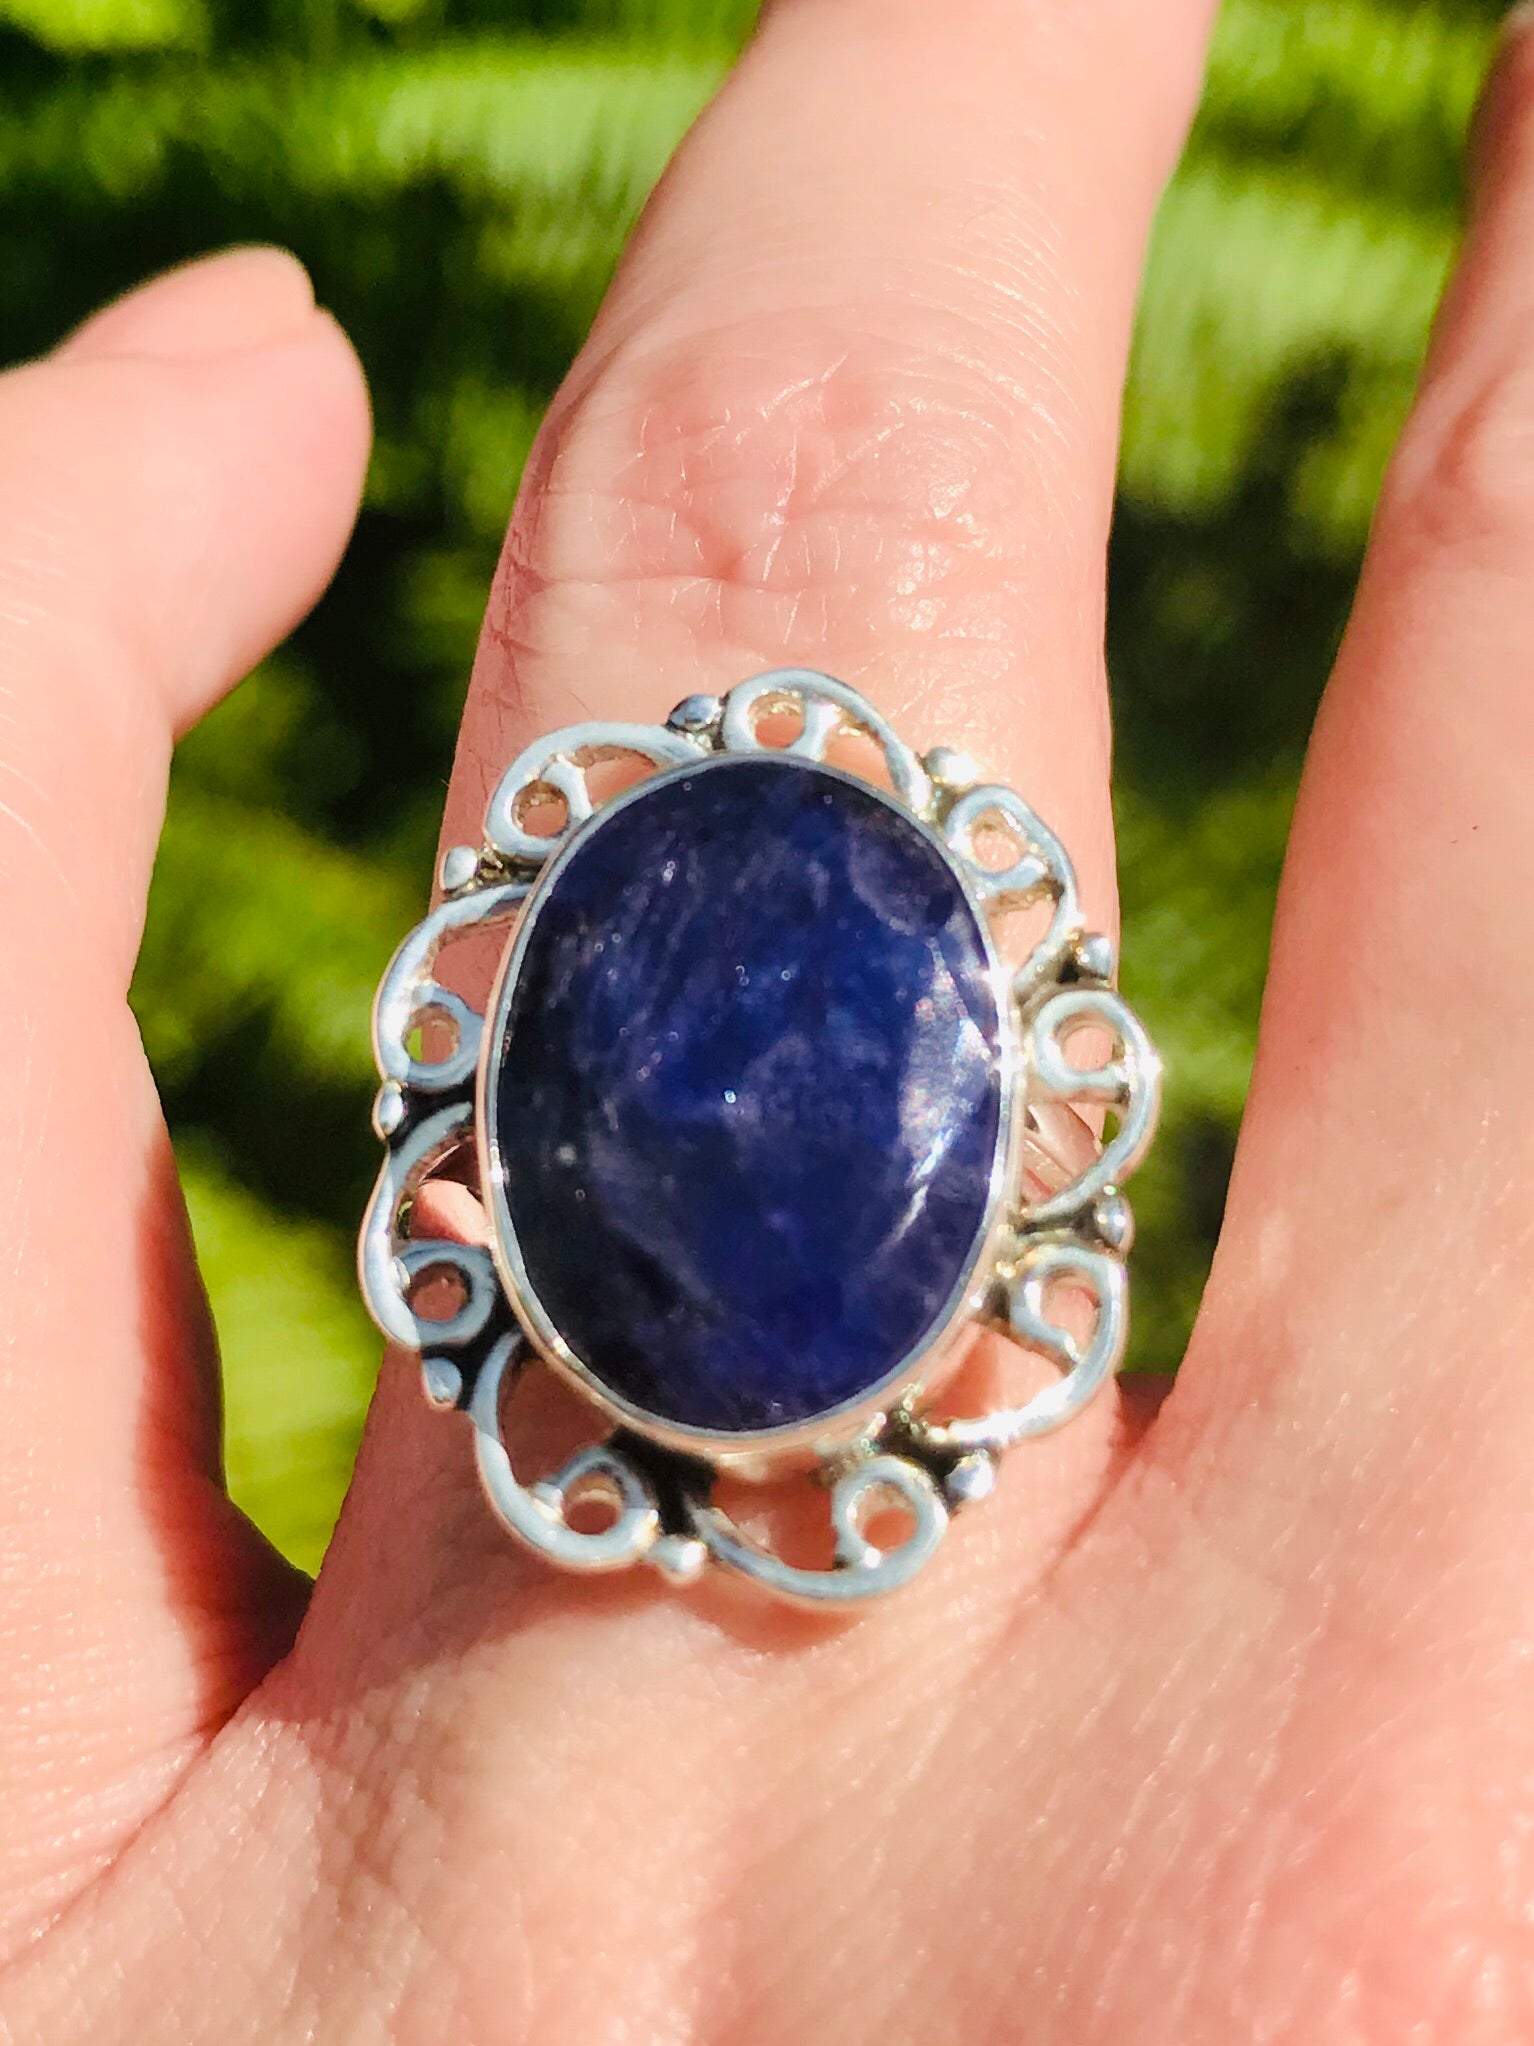 Blue Sapphire Cocktail Ring Size 7.25 - Morganna’s Treasures 